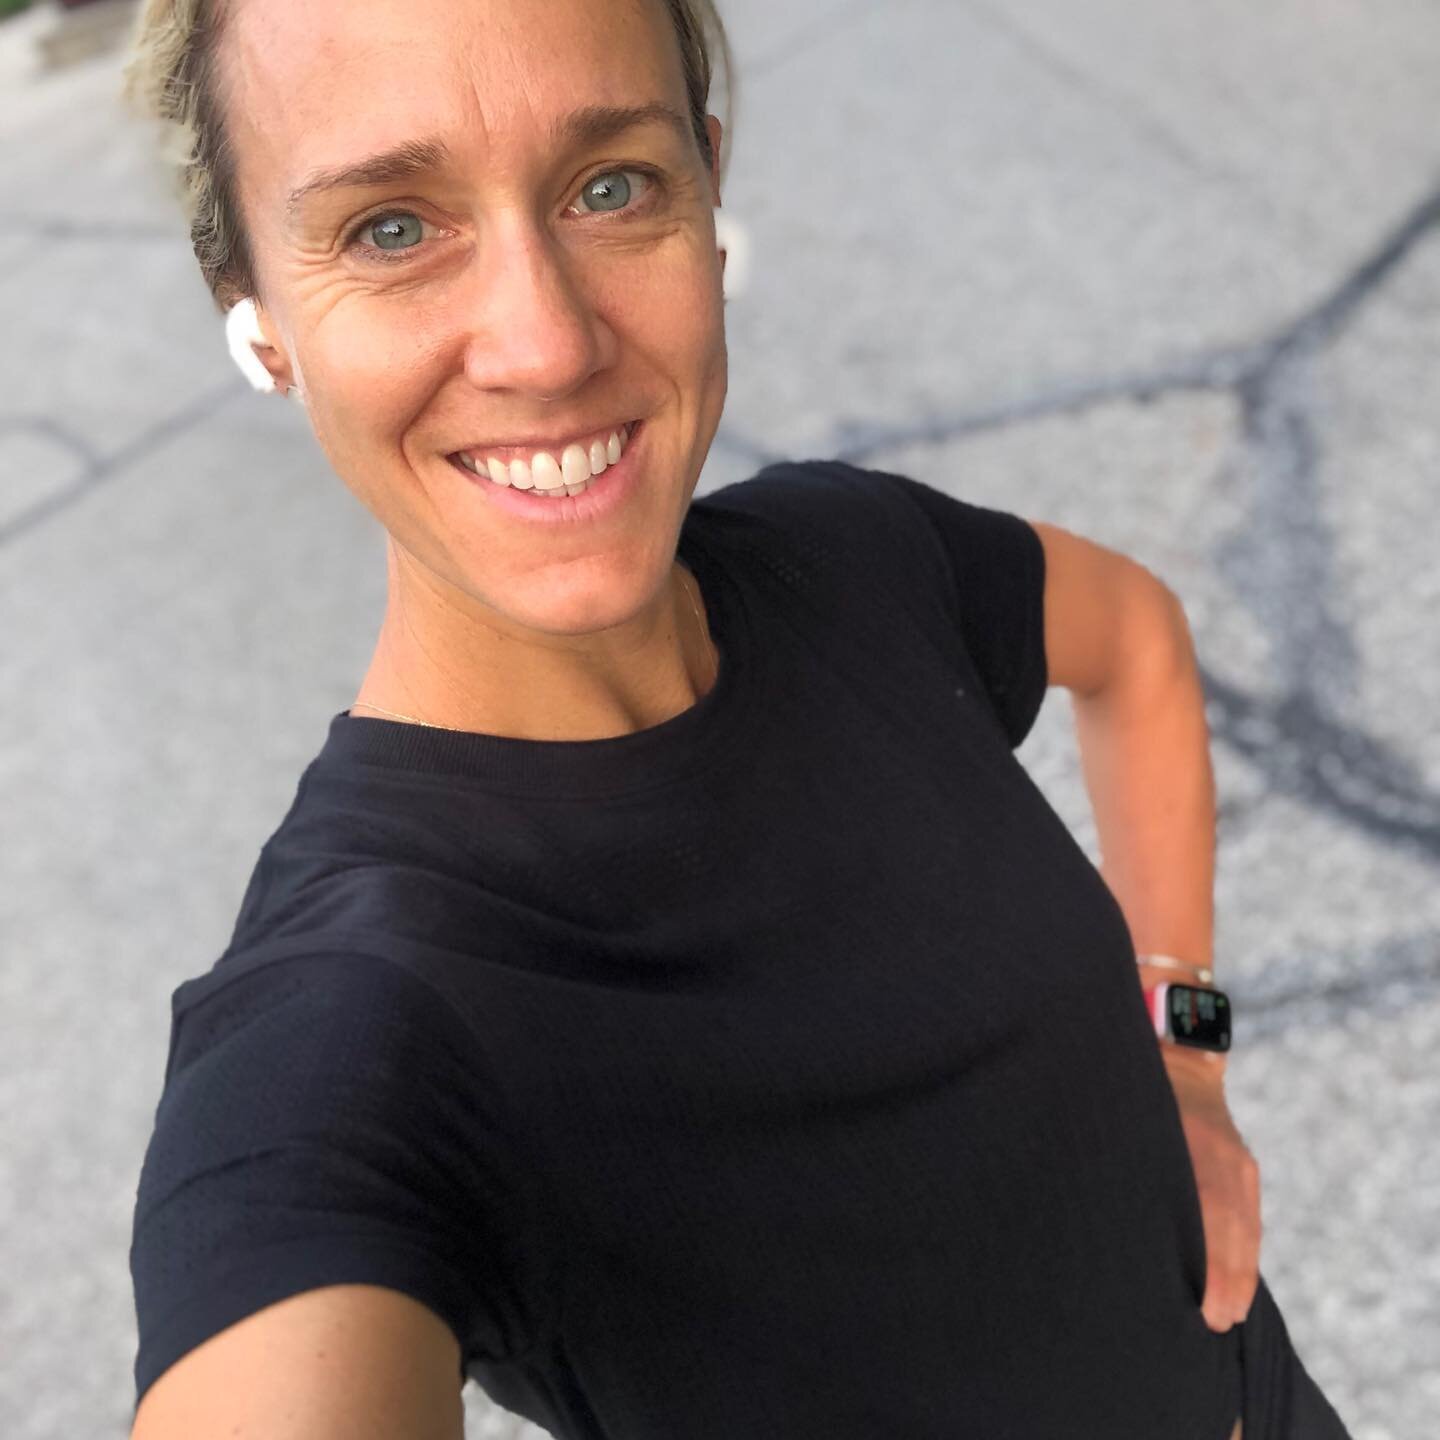 I&rsquo;ve started walking in the mornings &mdash; not running &mdash; and it&rsquo;s been such a wonderful wake-up routine. My hips have been talking to me lately, so to reduce my joint impact, I&rsquo;ve started a walking and strength-training regi